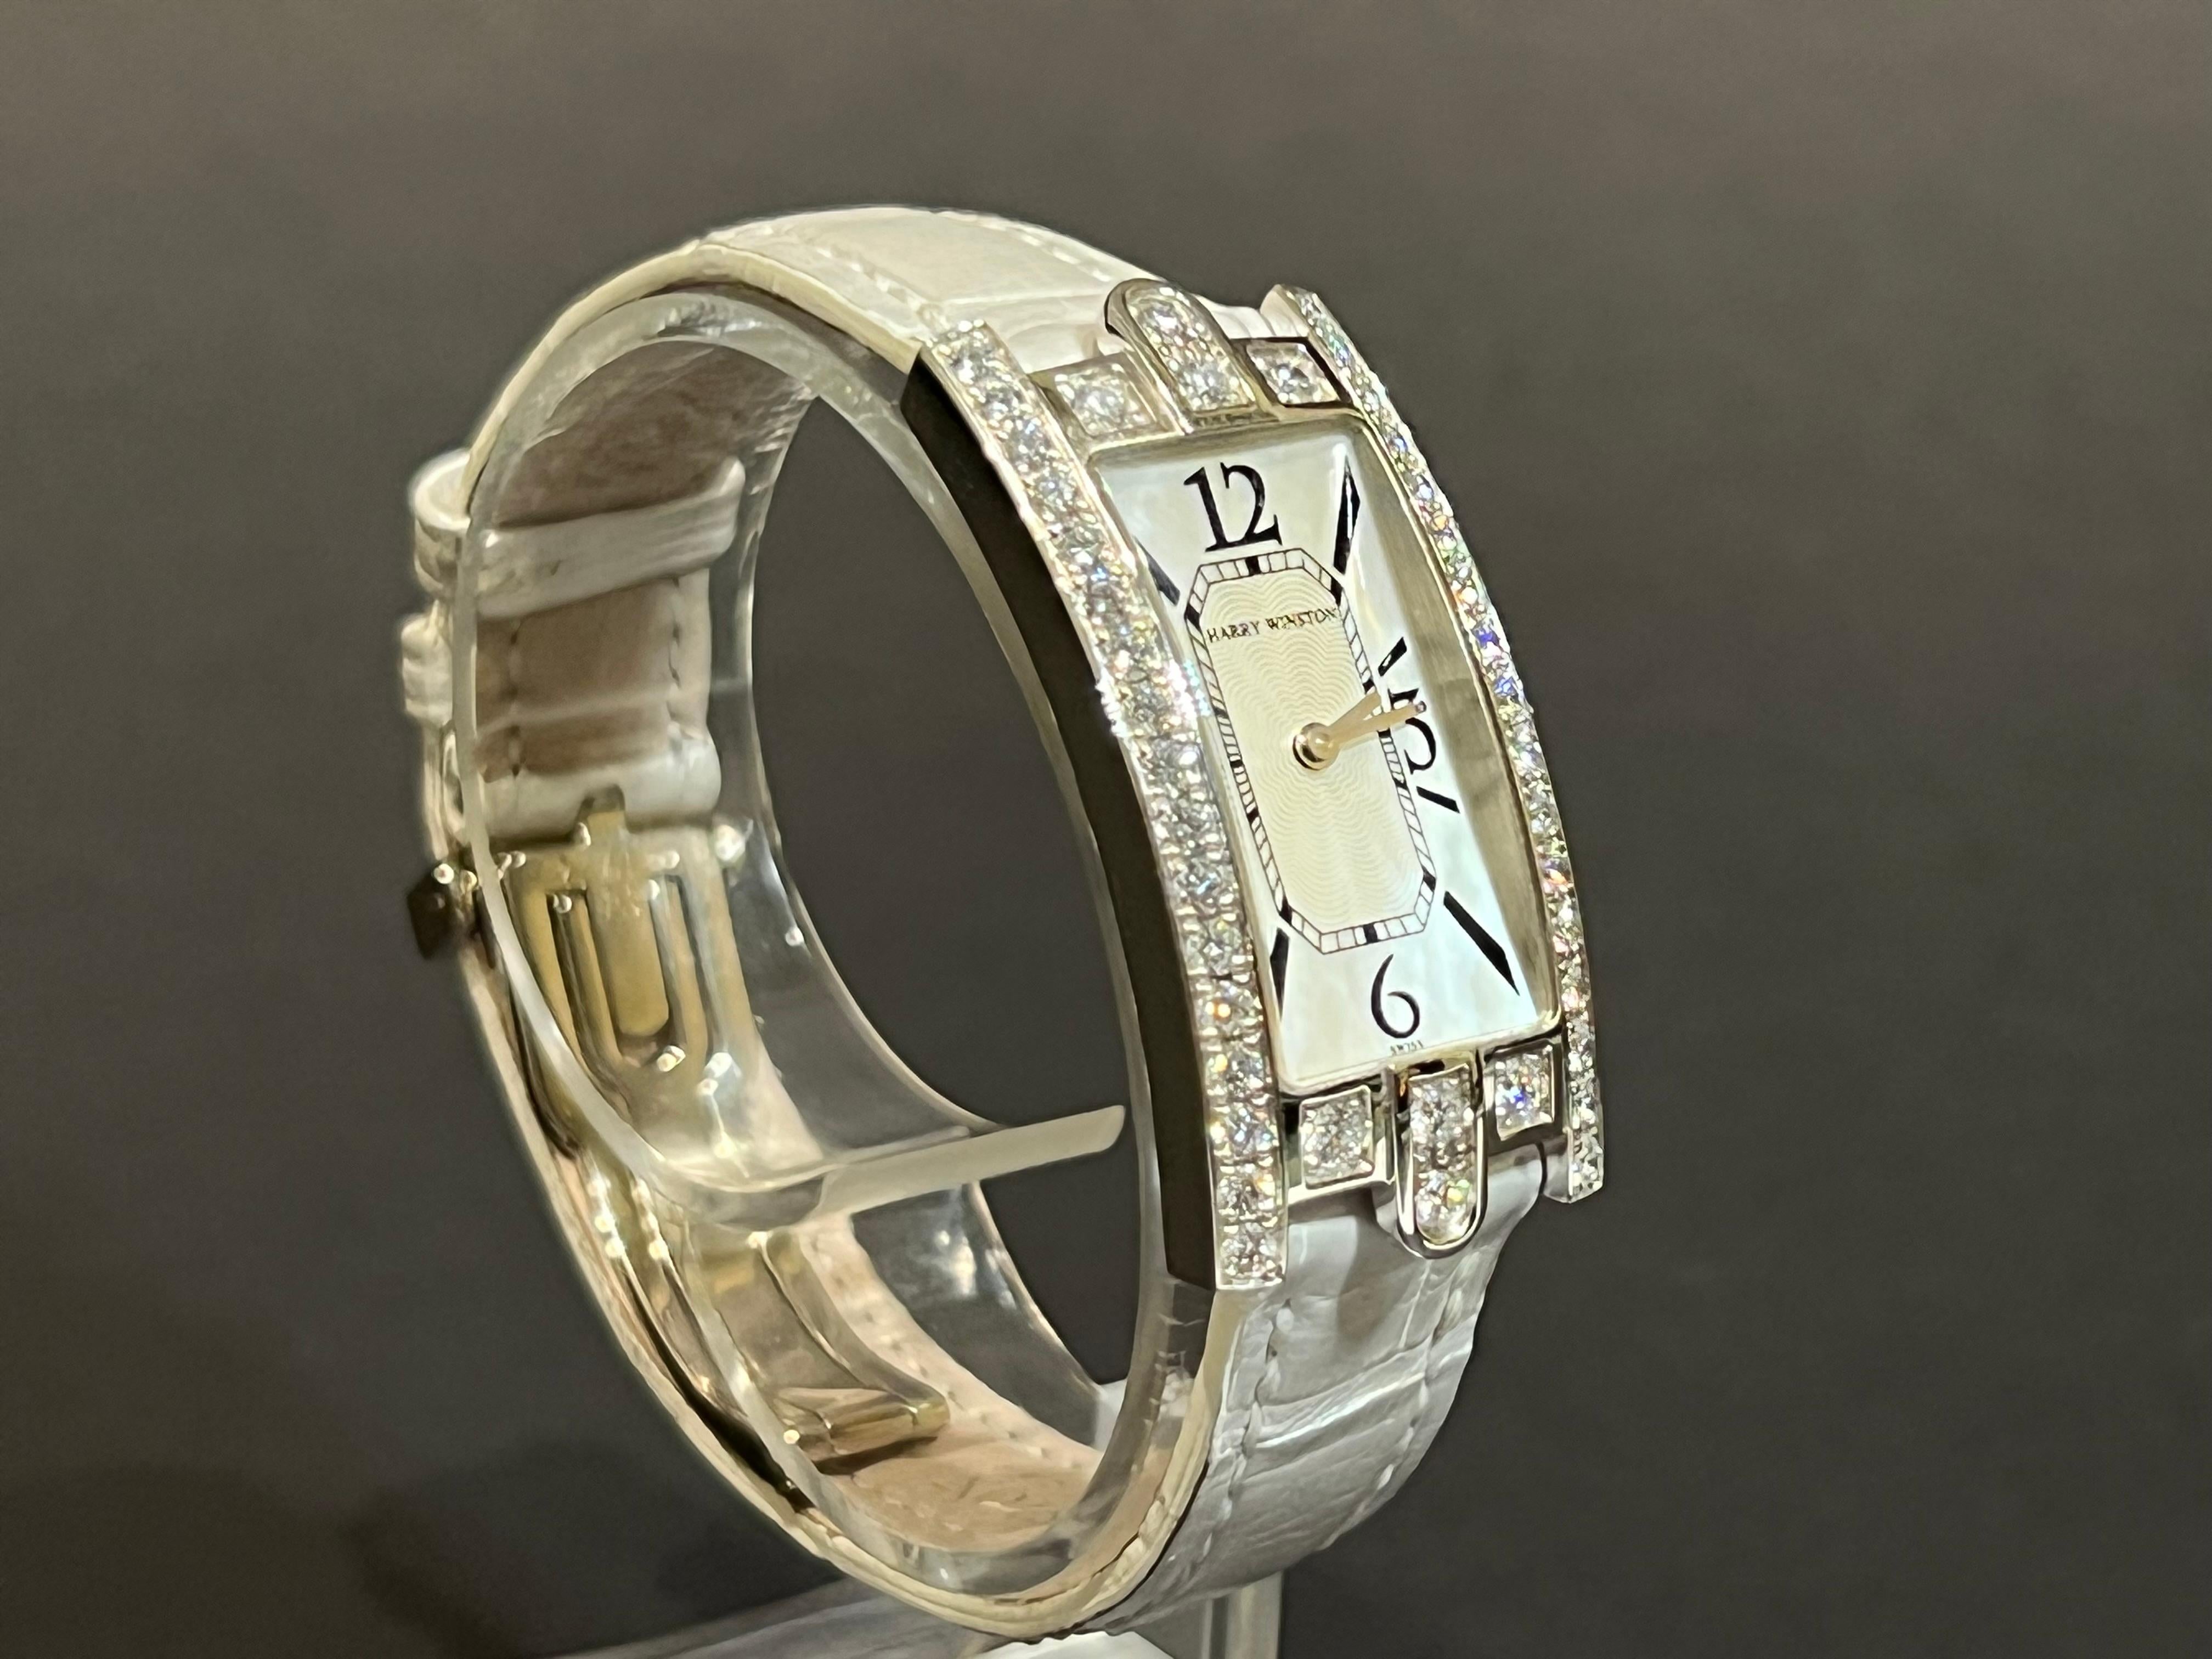 Diamond crown accent. Twice signed 18K and leather bracelet.

Brand: Harry Winston
Type: Wristwatch
Model Name: Avenue
Model Number: 330 LQW
Bezel Material: 18K White Gold
Case Material: 18K White Gold
Case back Material: 18K White Gold
Movement: